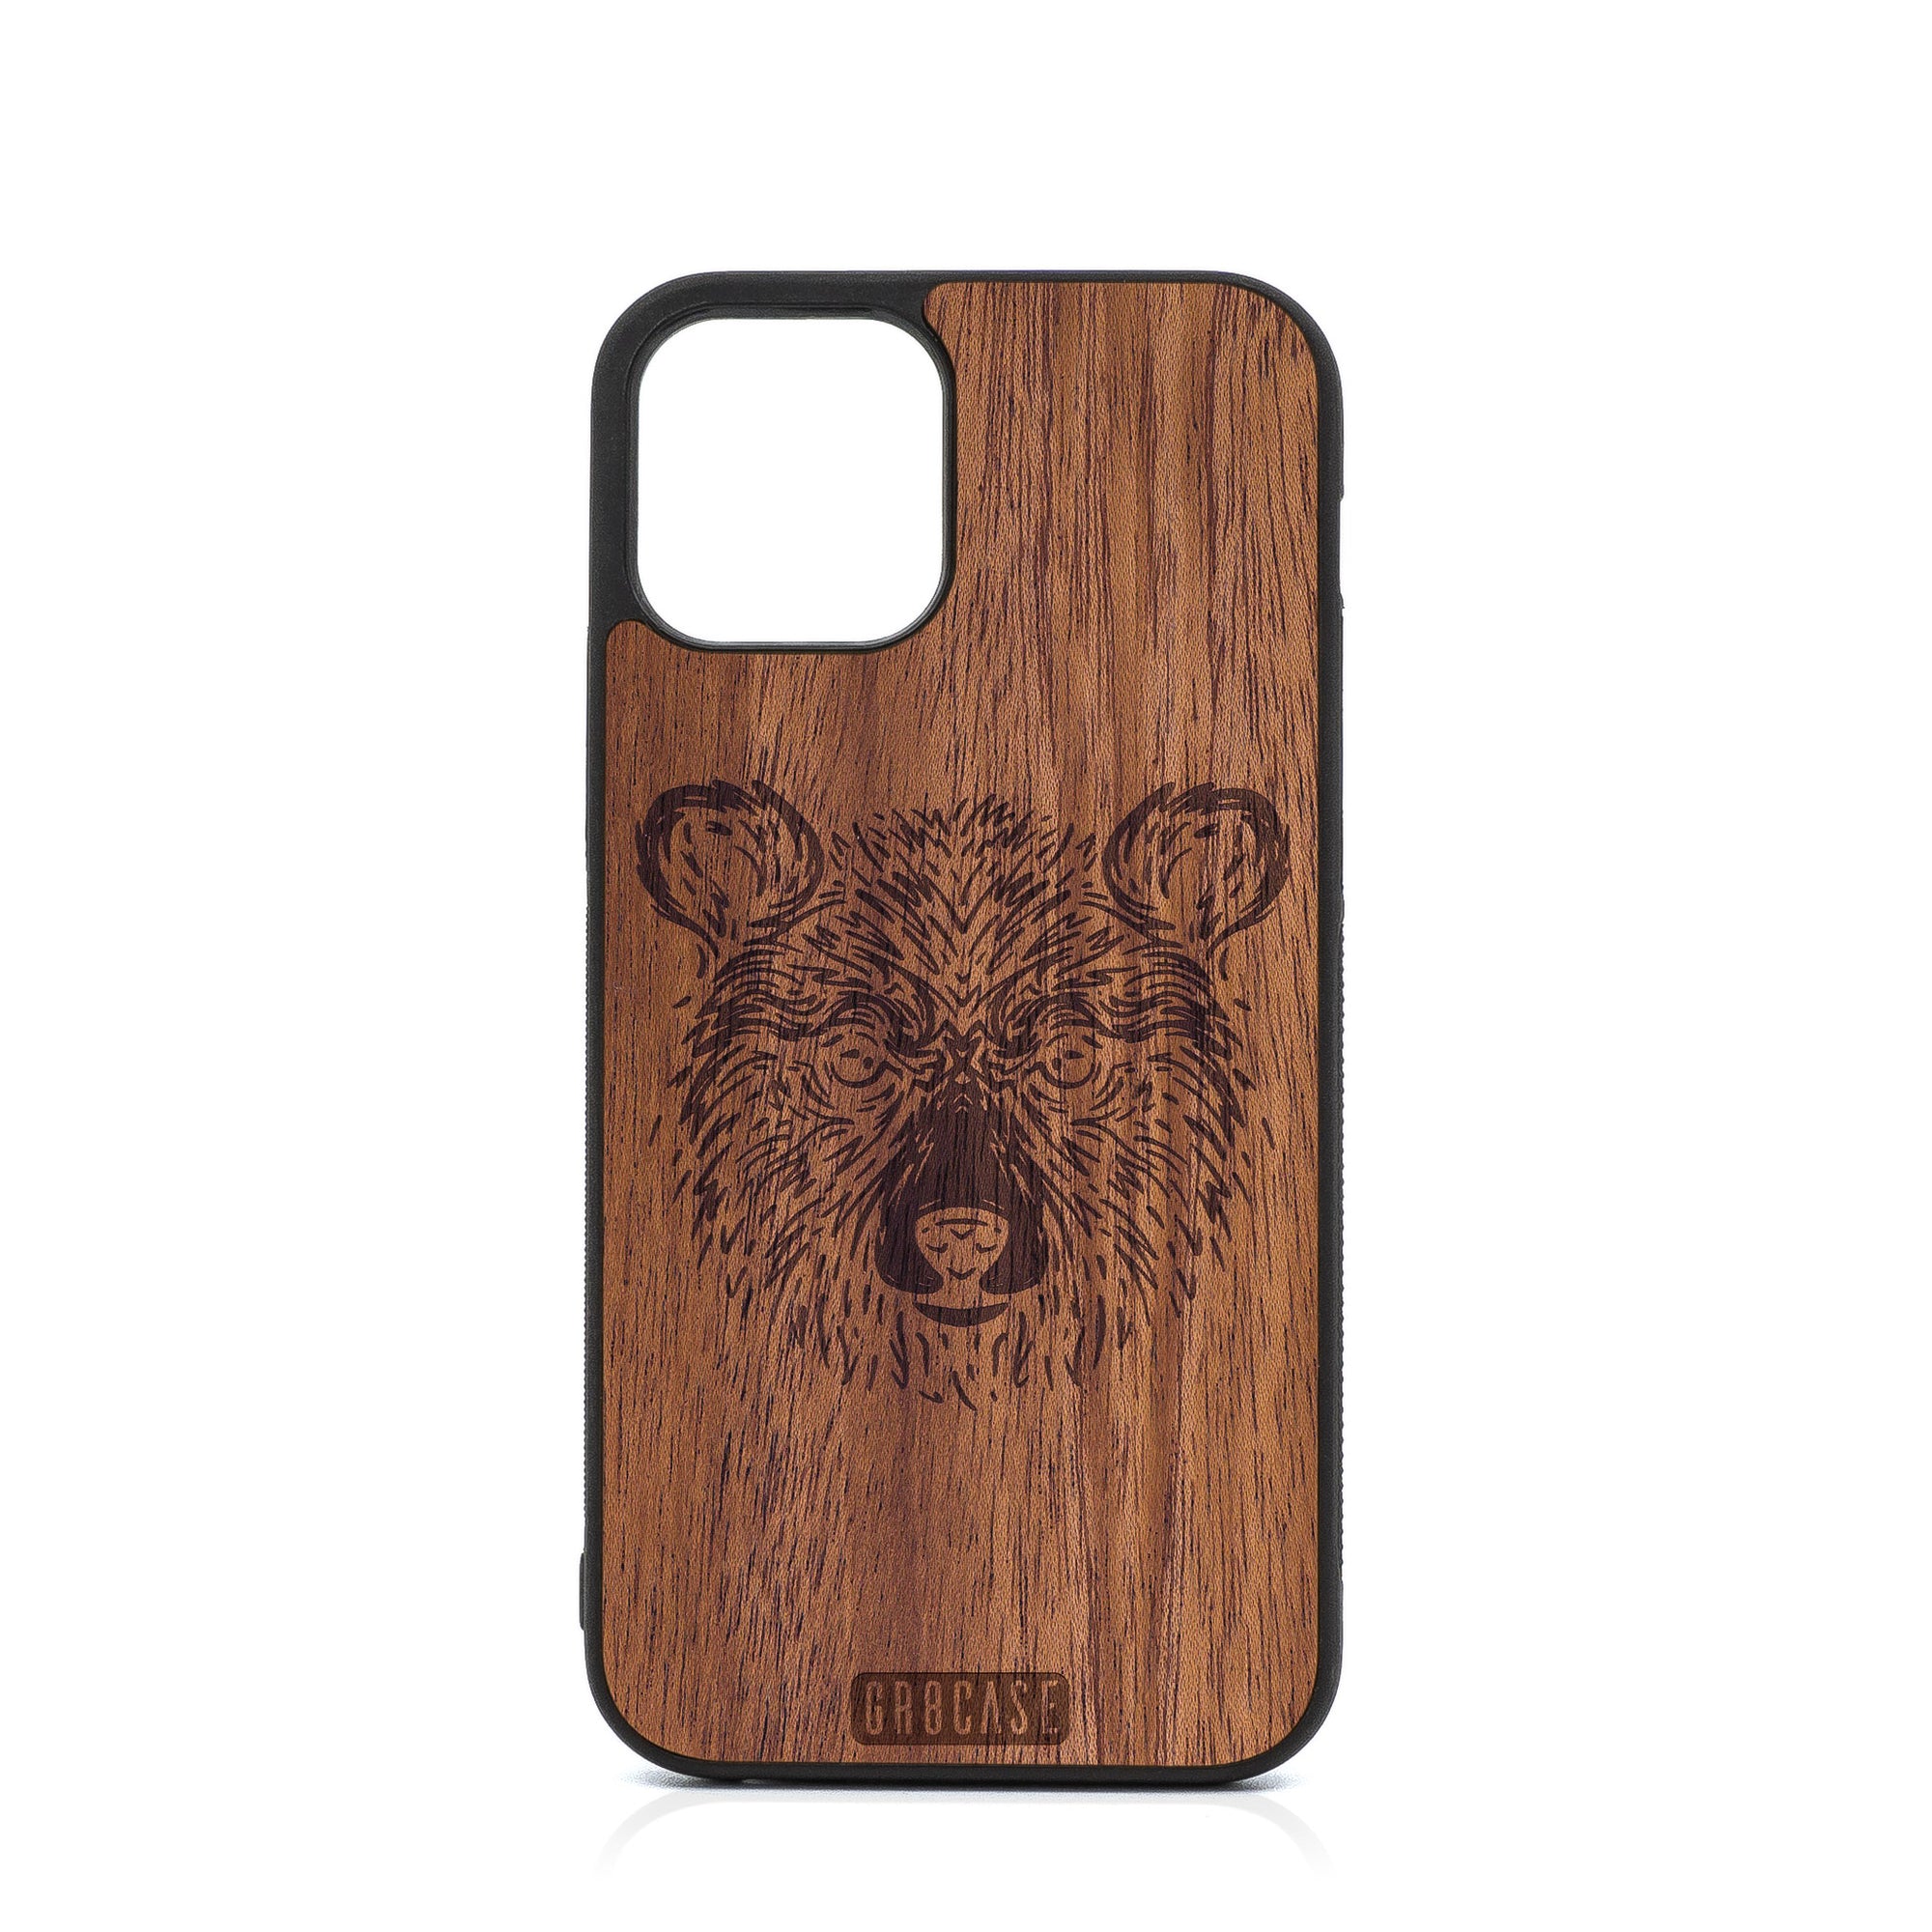 Furry Bear Design Wood Case For iPhone 12 Pro